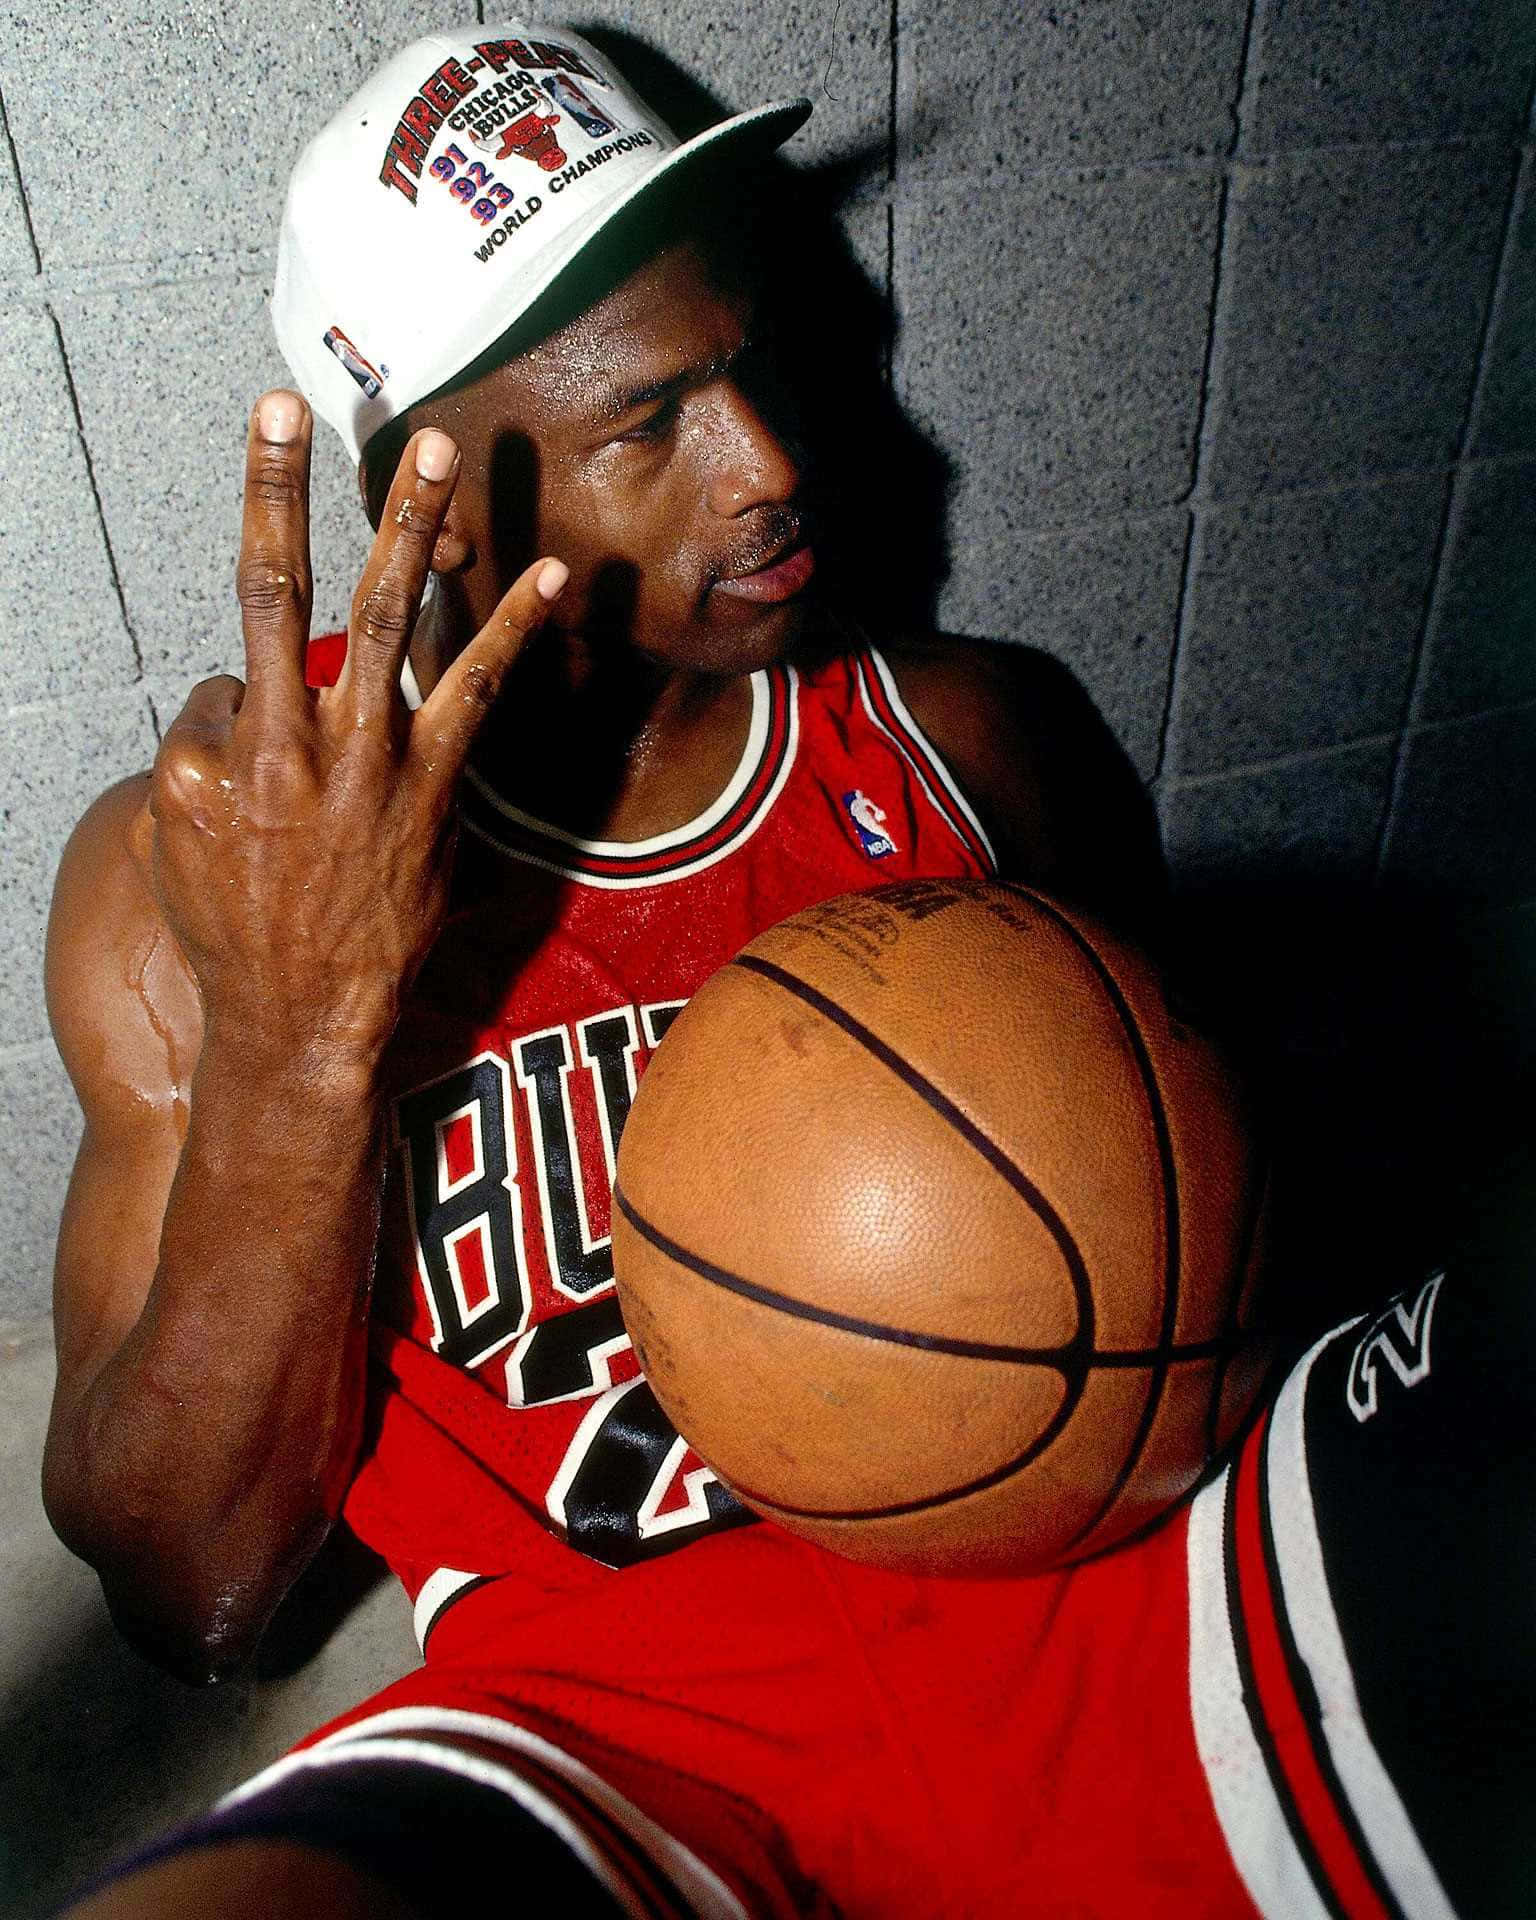 Get one of the greatest athletes of all-time on your phone with the Michael Jordan iPhone Wallpaper